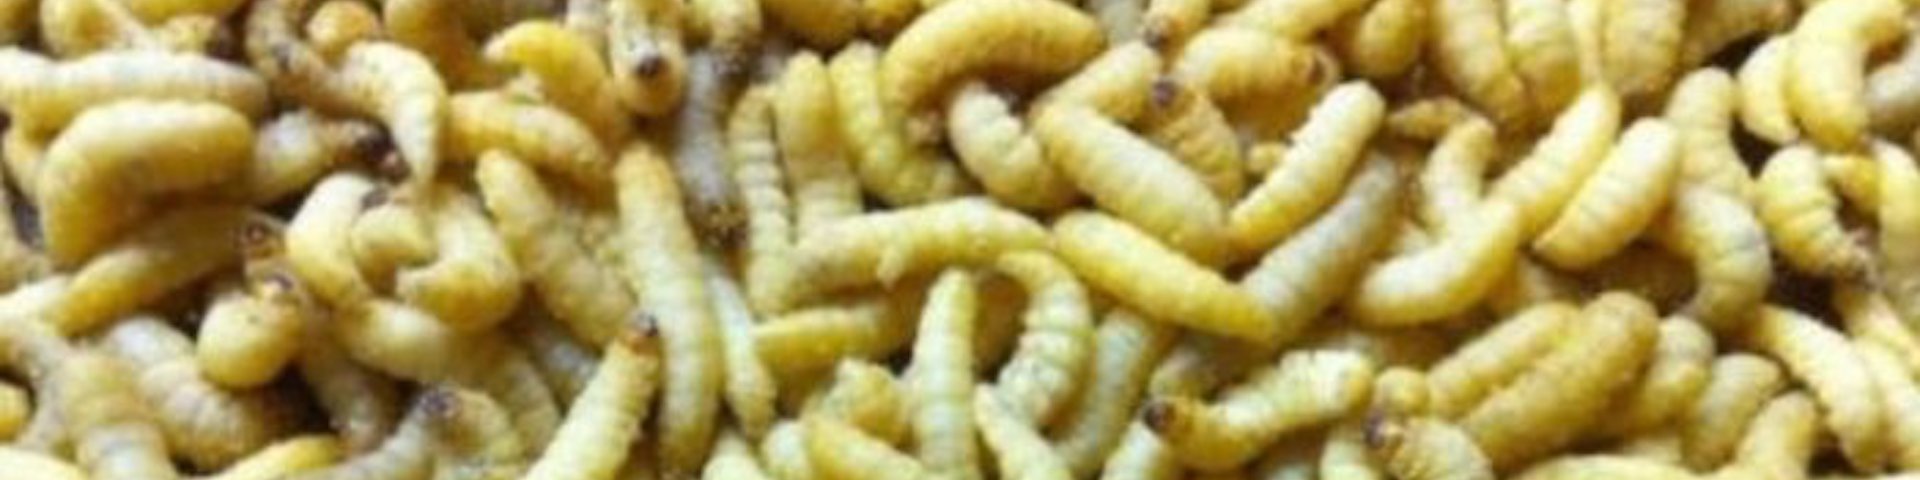 download wax worms for sale